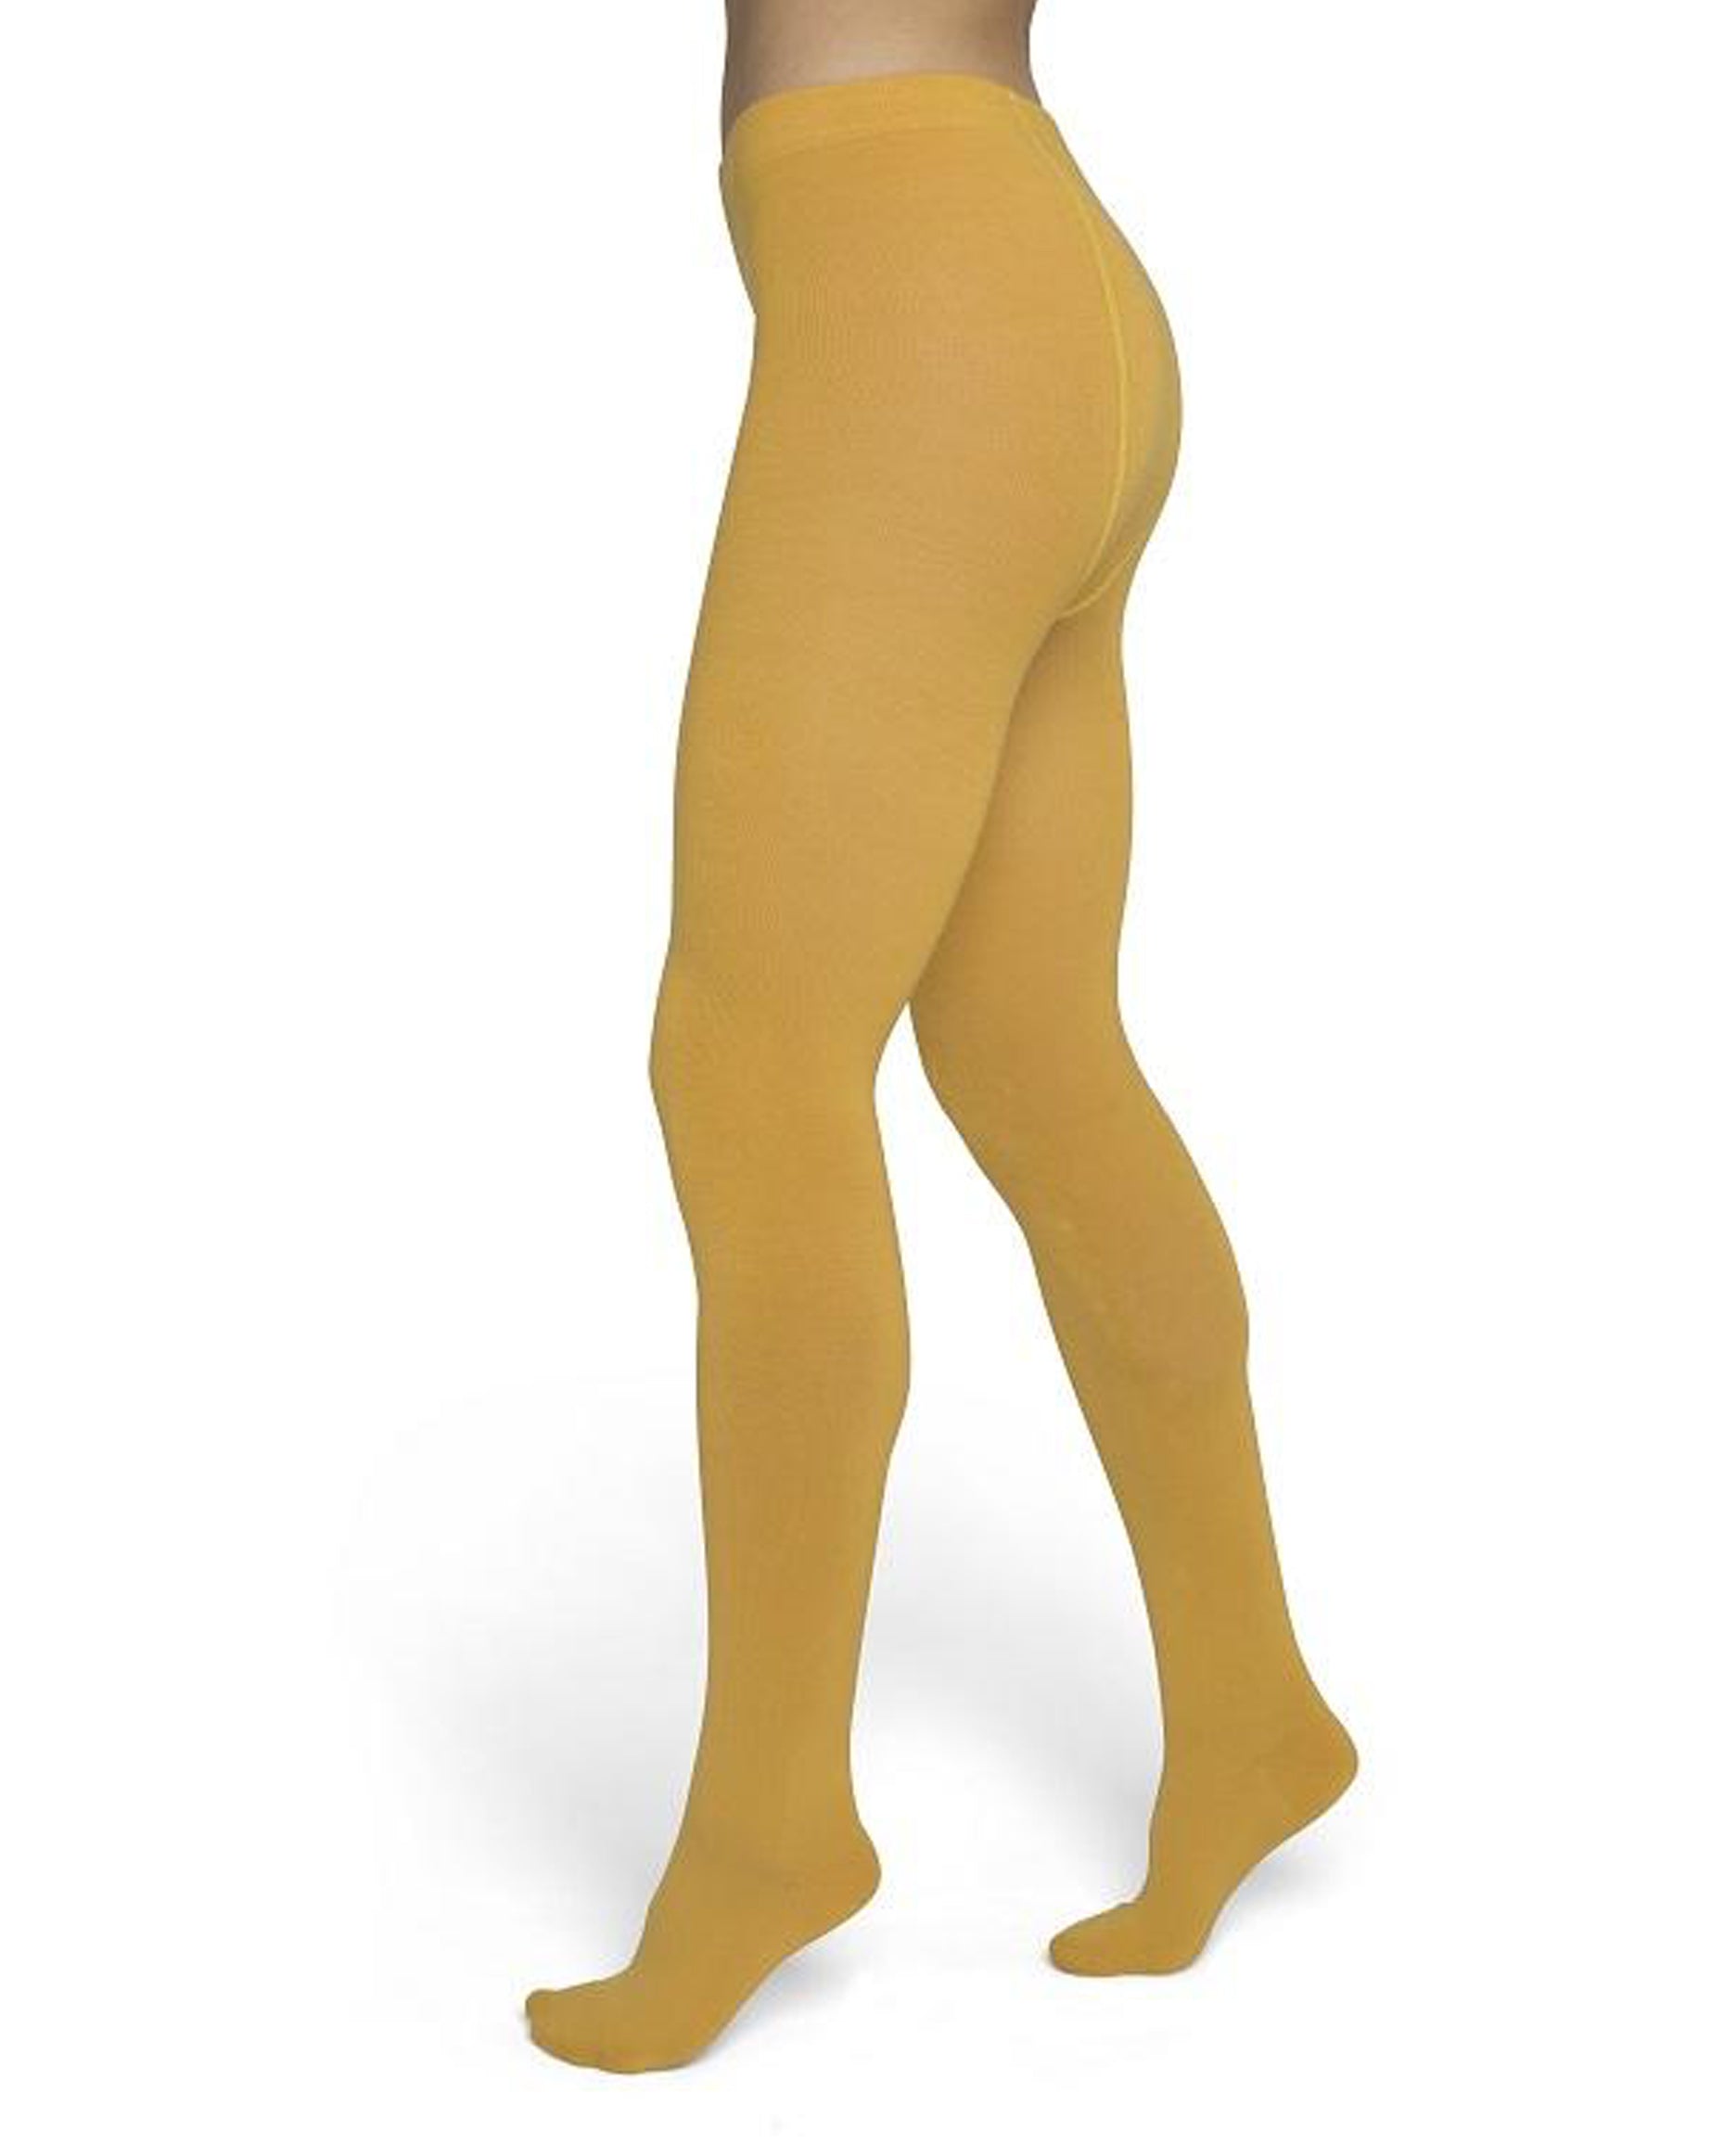 Bonnie Doon Bio Cotton Tights - Light mustard yellow (egg) Warm and soft knitted organic cotton Winter thermal tights.